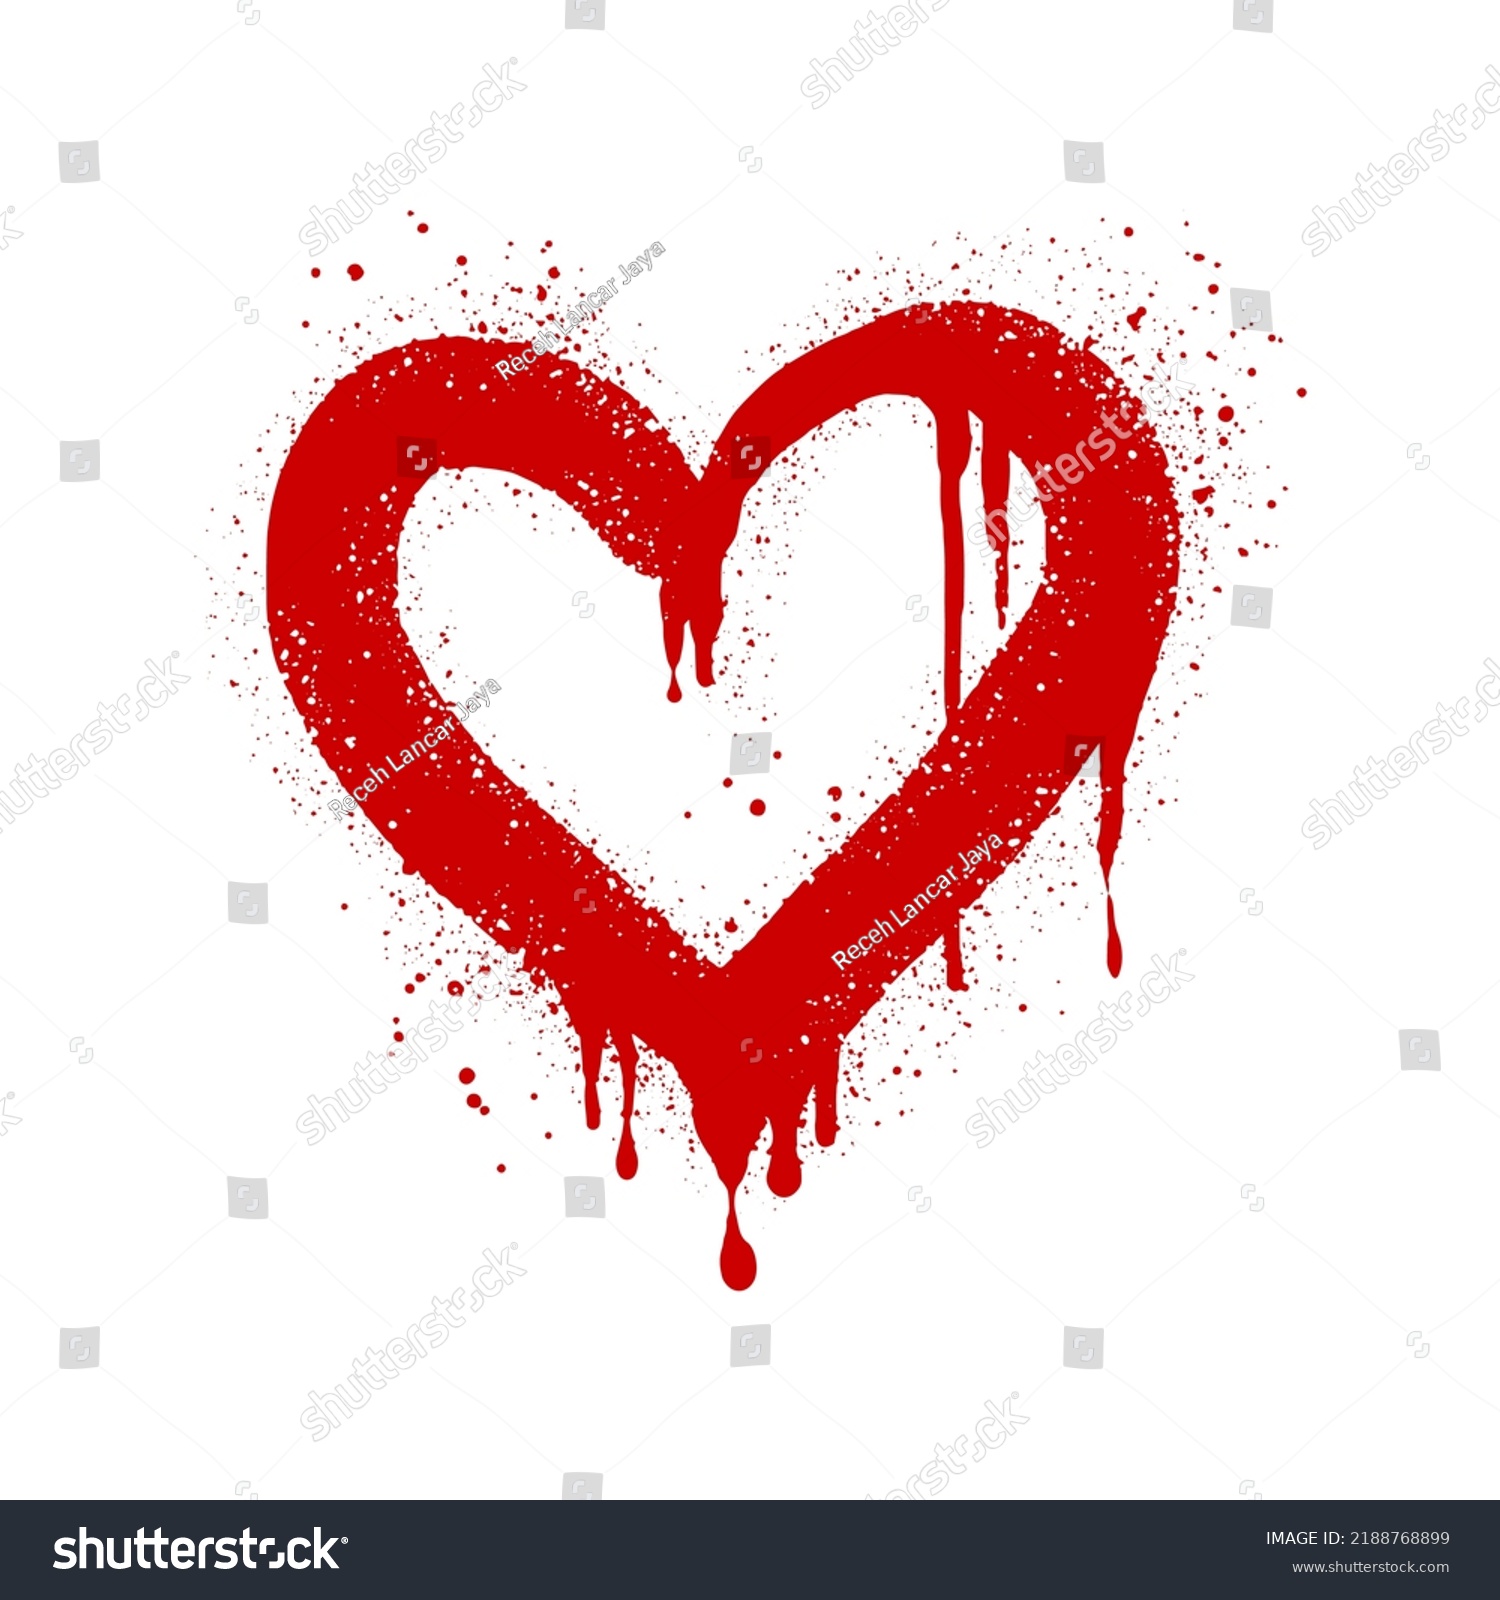 SVG of Spray painted graffiti heart sign in red over white. Love heart drip symbol. isolated on white background. vector illustration svg